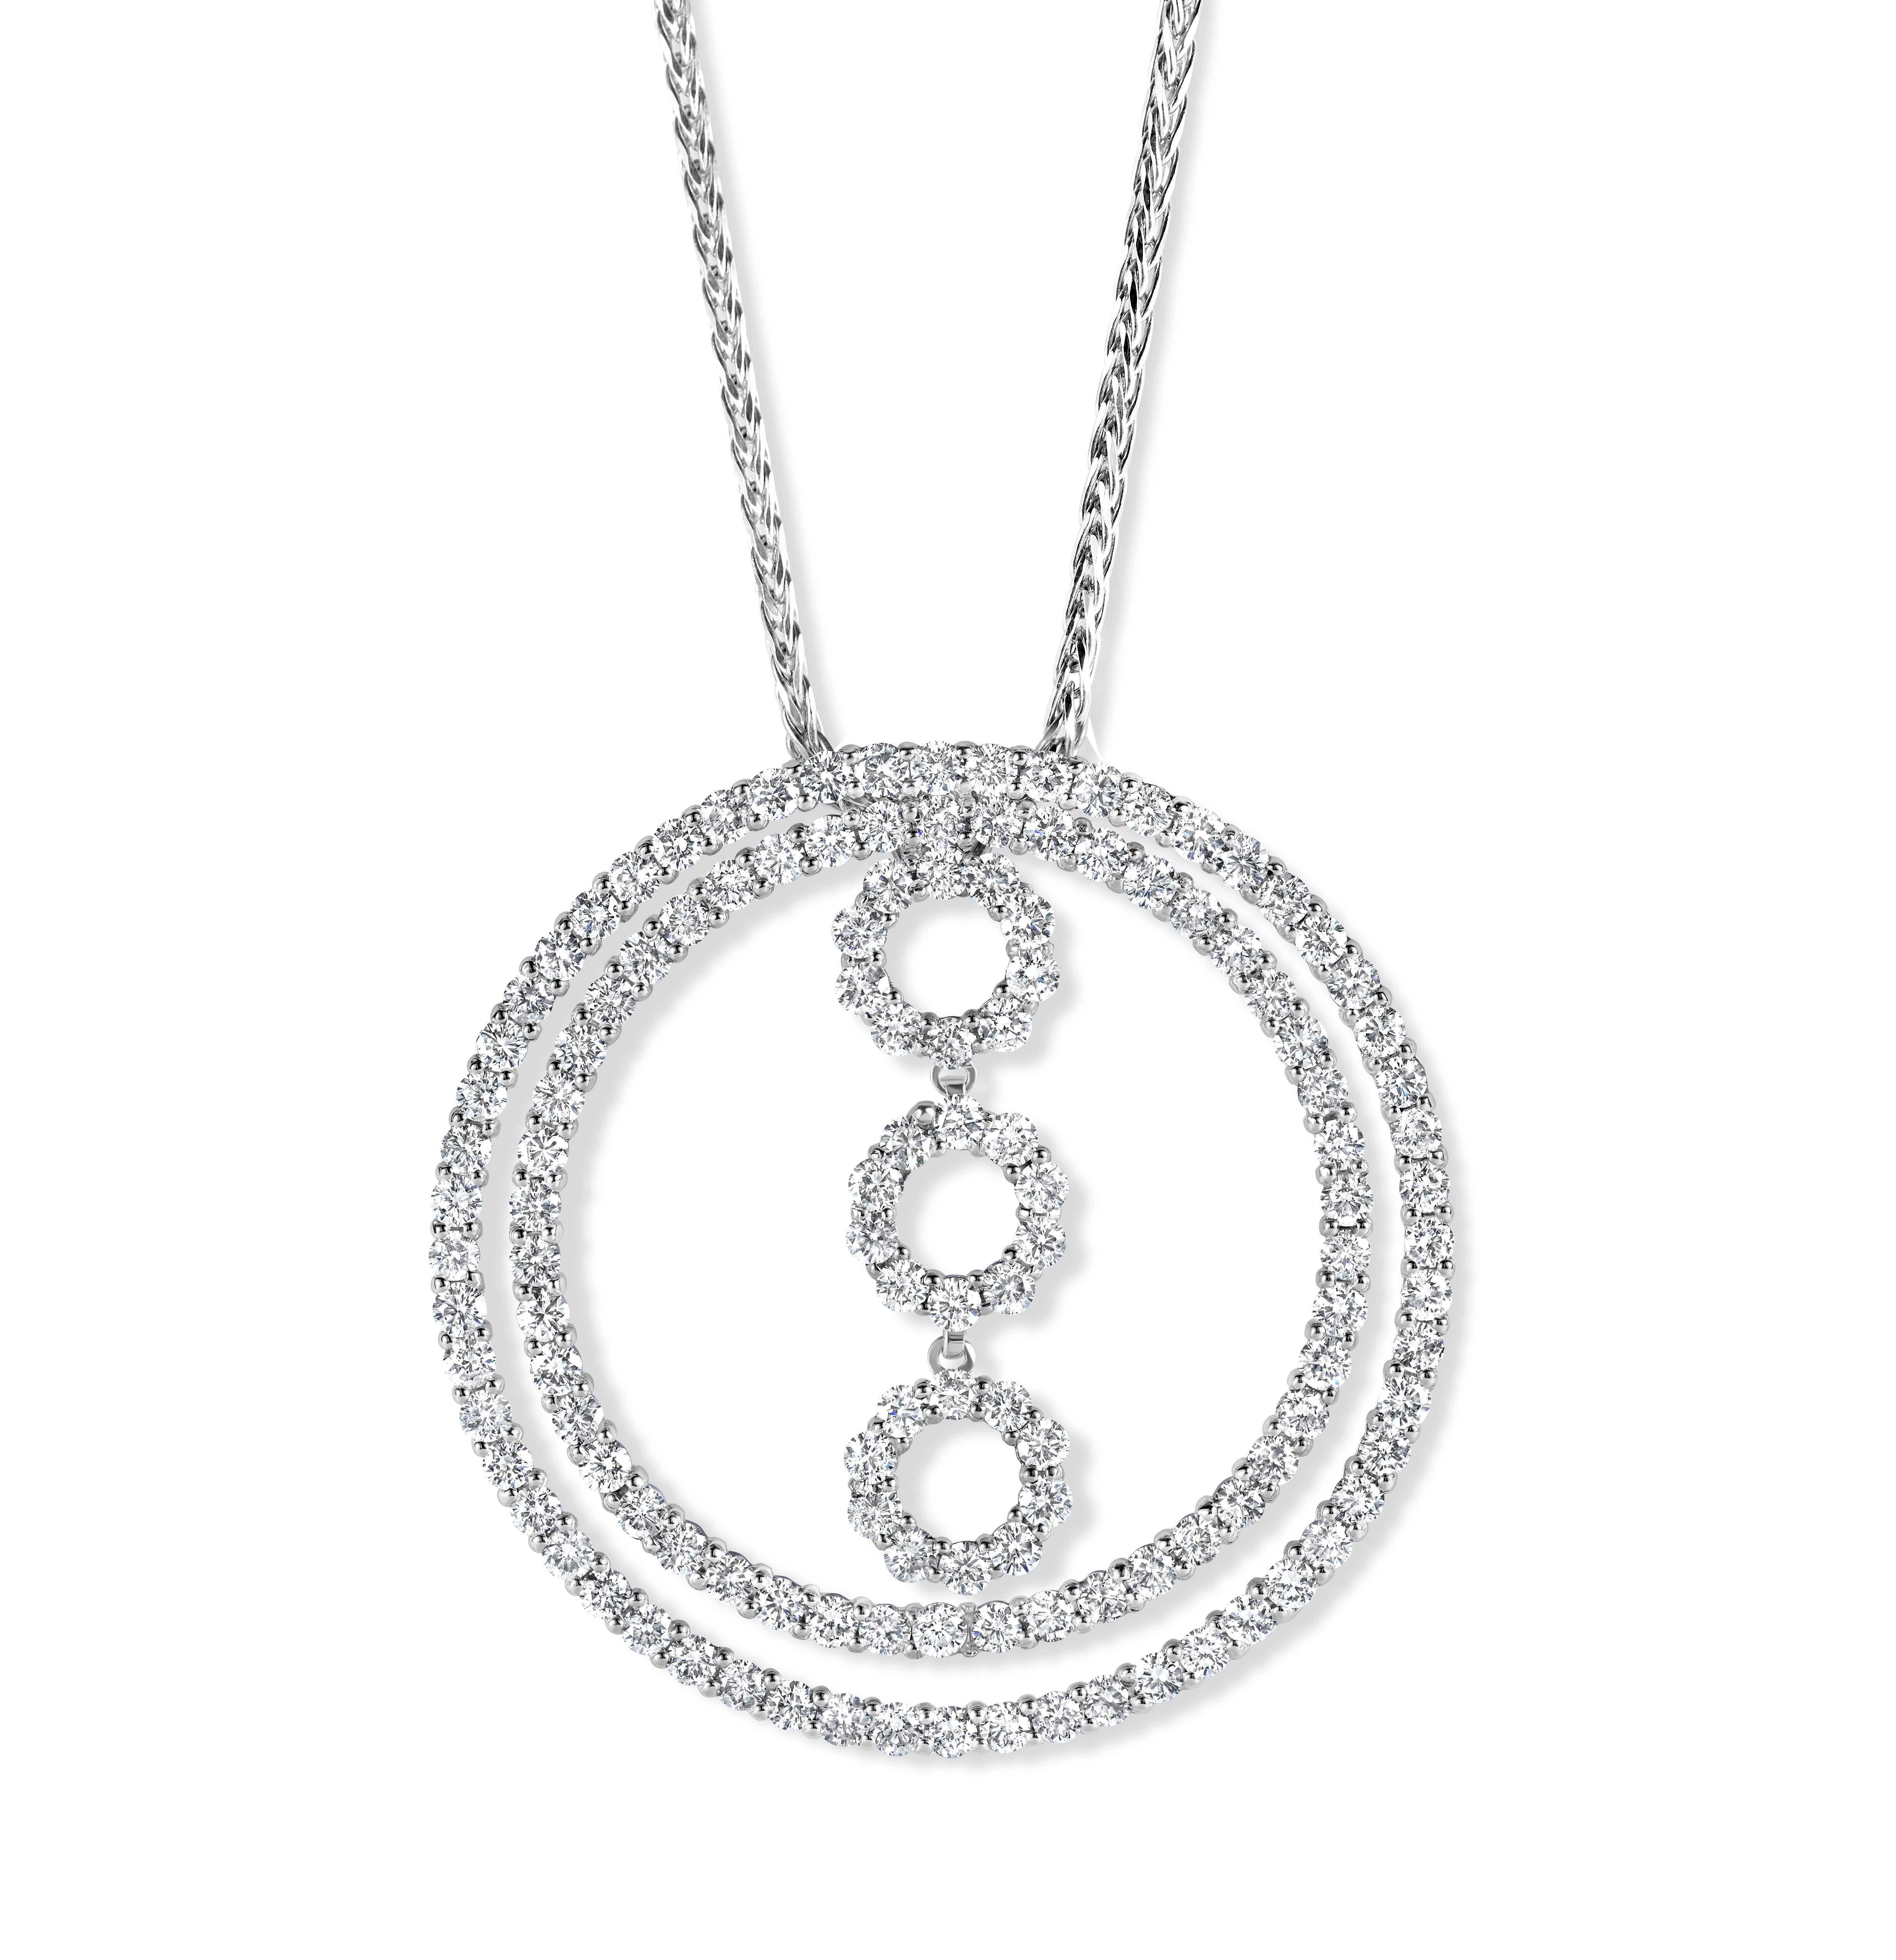 Artisan Stunning 18 Karat White Gold 6.73 Carat Diamond Pendant with a Thick Chain For Sale